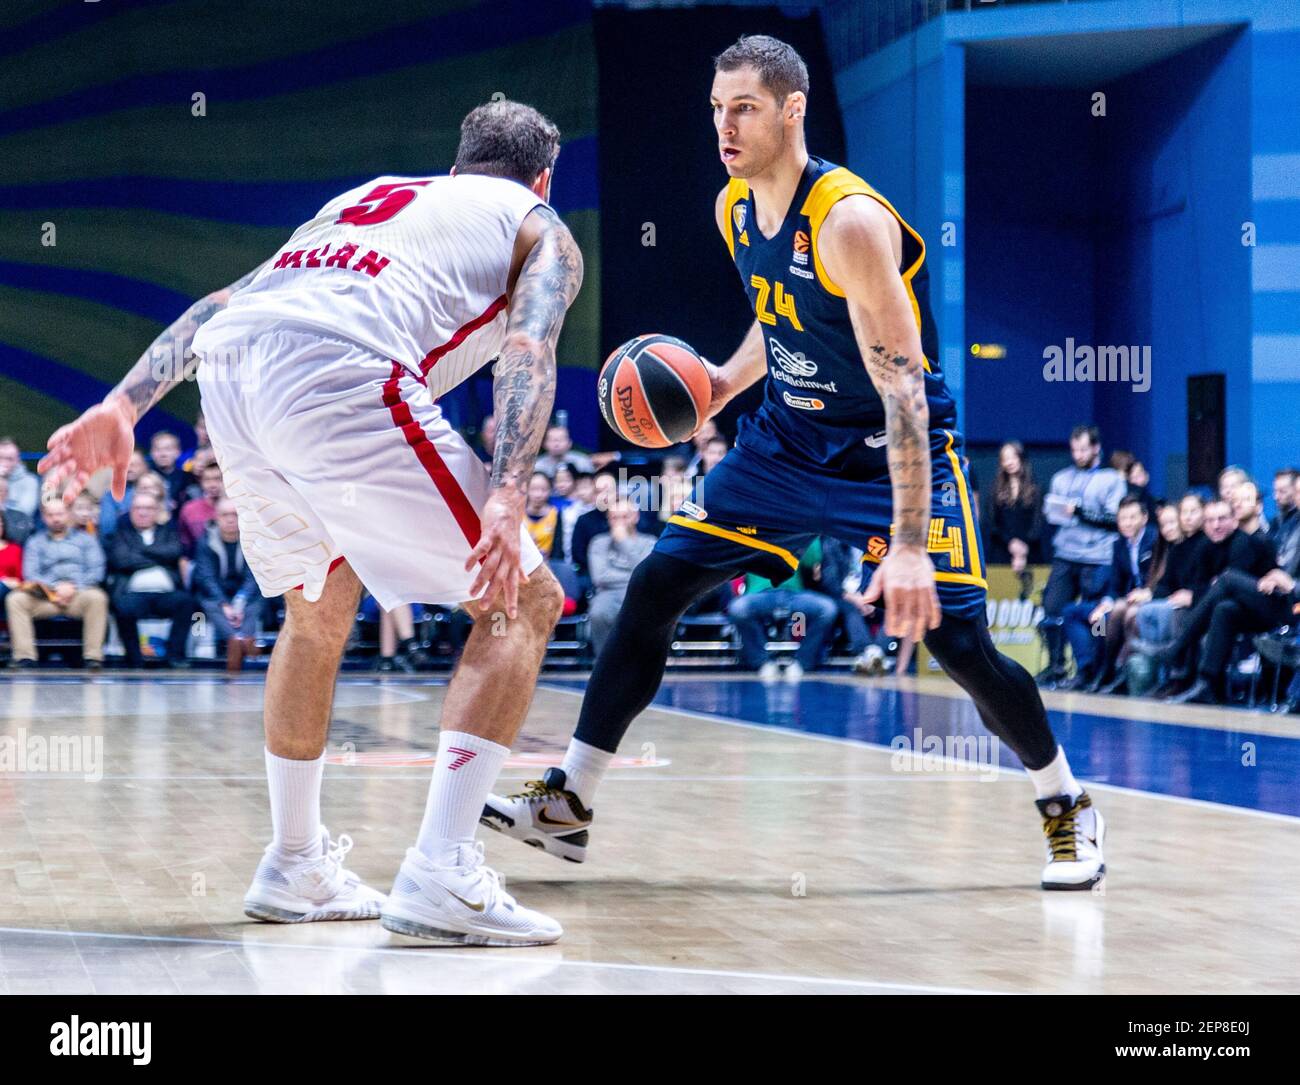 24 Stefan Jovic of Khimki Moscow seen in action against AX Armani Exchange  Milan during the round 8 match in the Turkish Airlines Euroleague. (Final  score; Khimki Moscow won 87:79 AX Armani